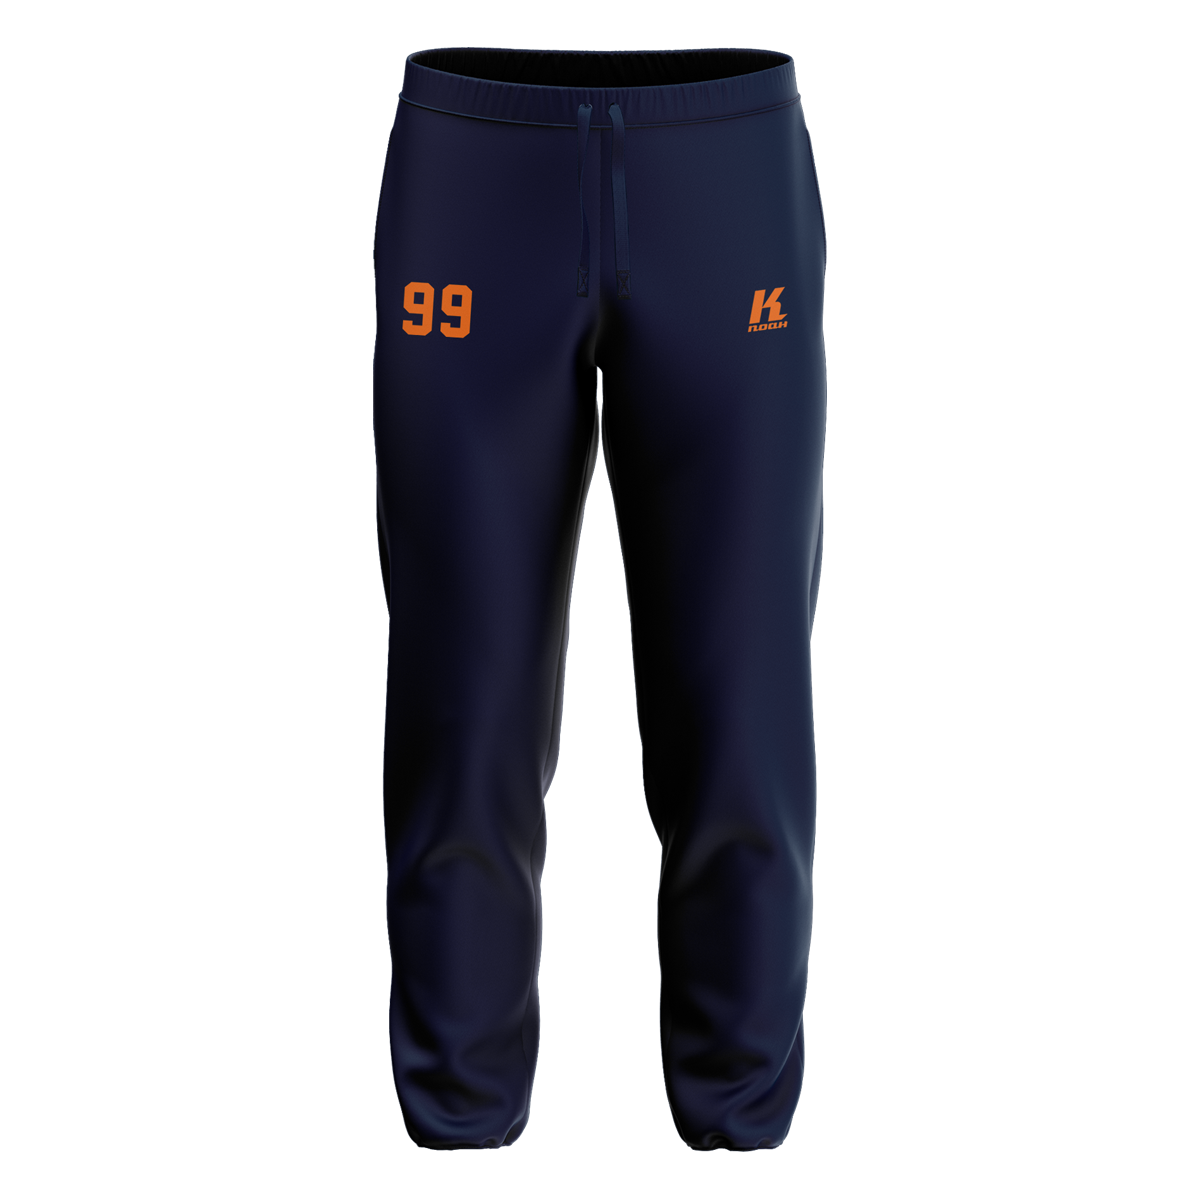 Tigers Sweatpant ST793 with Playernumber/Initials